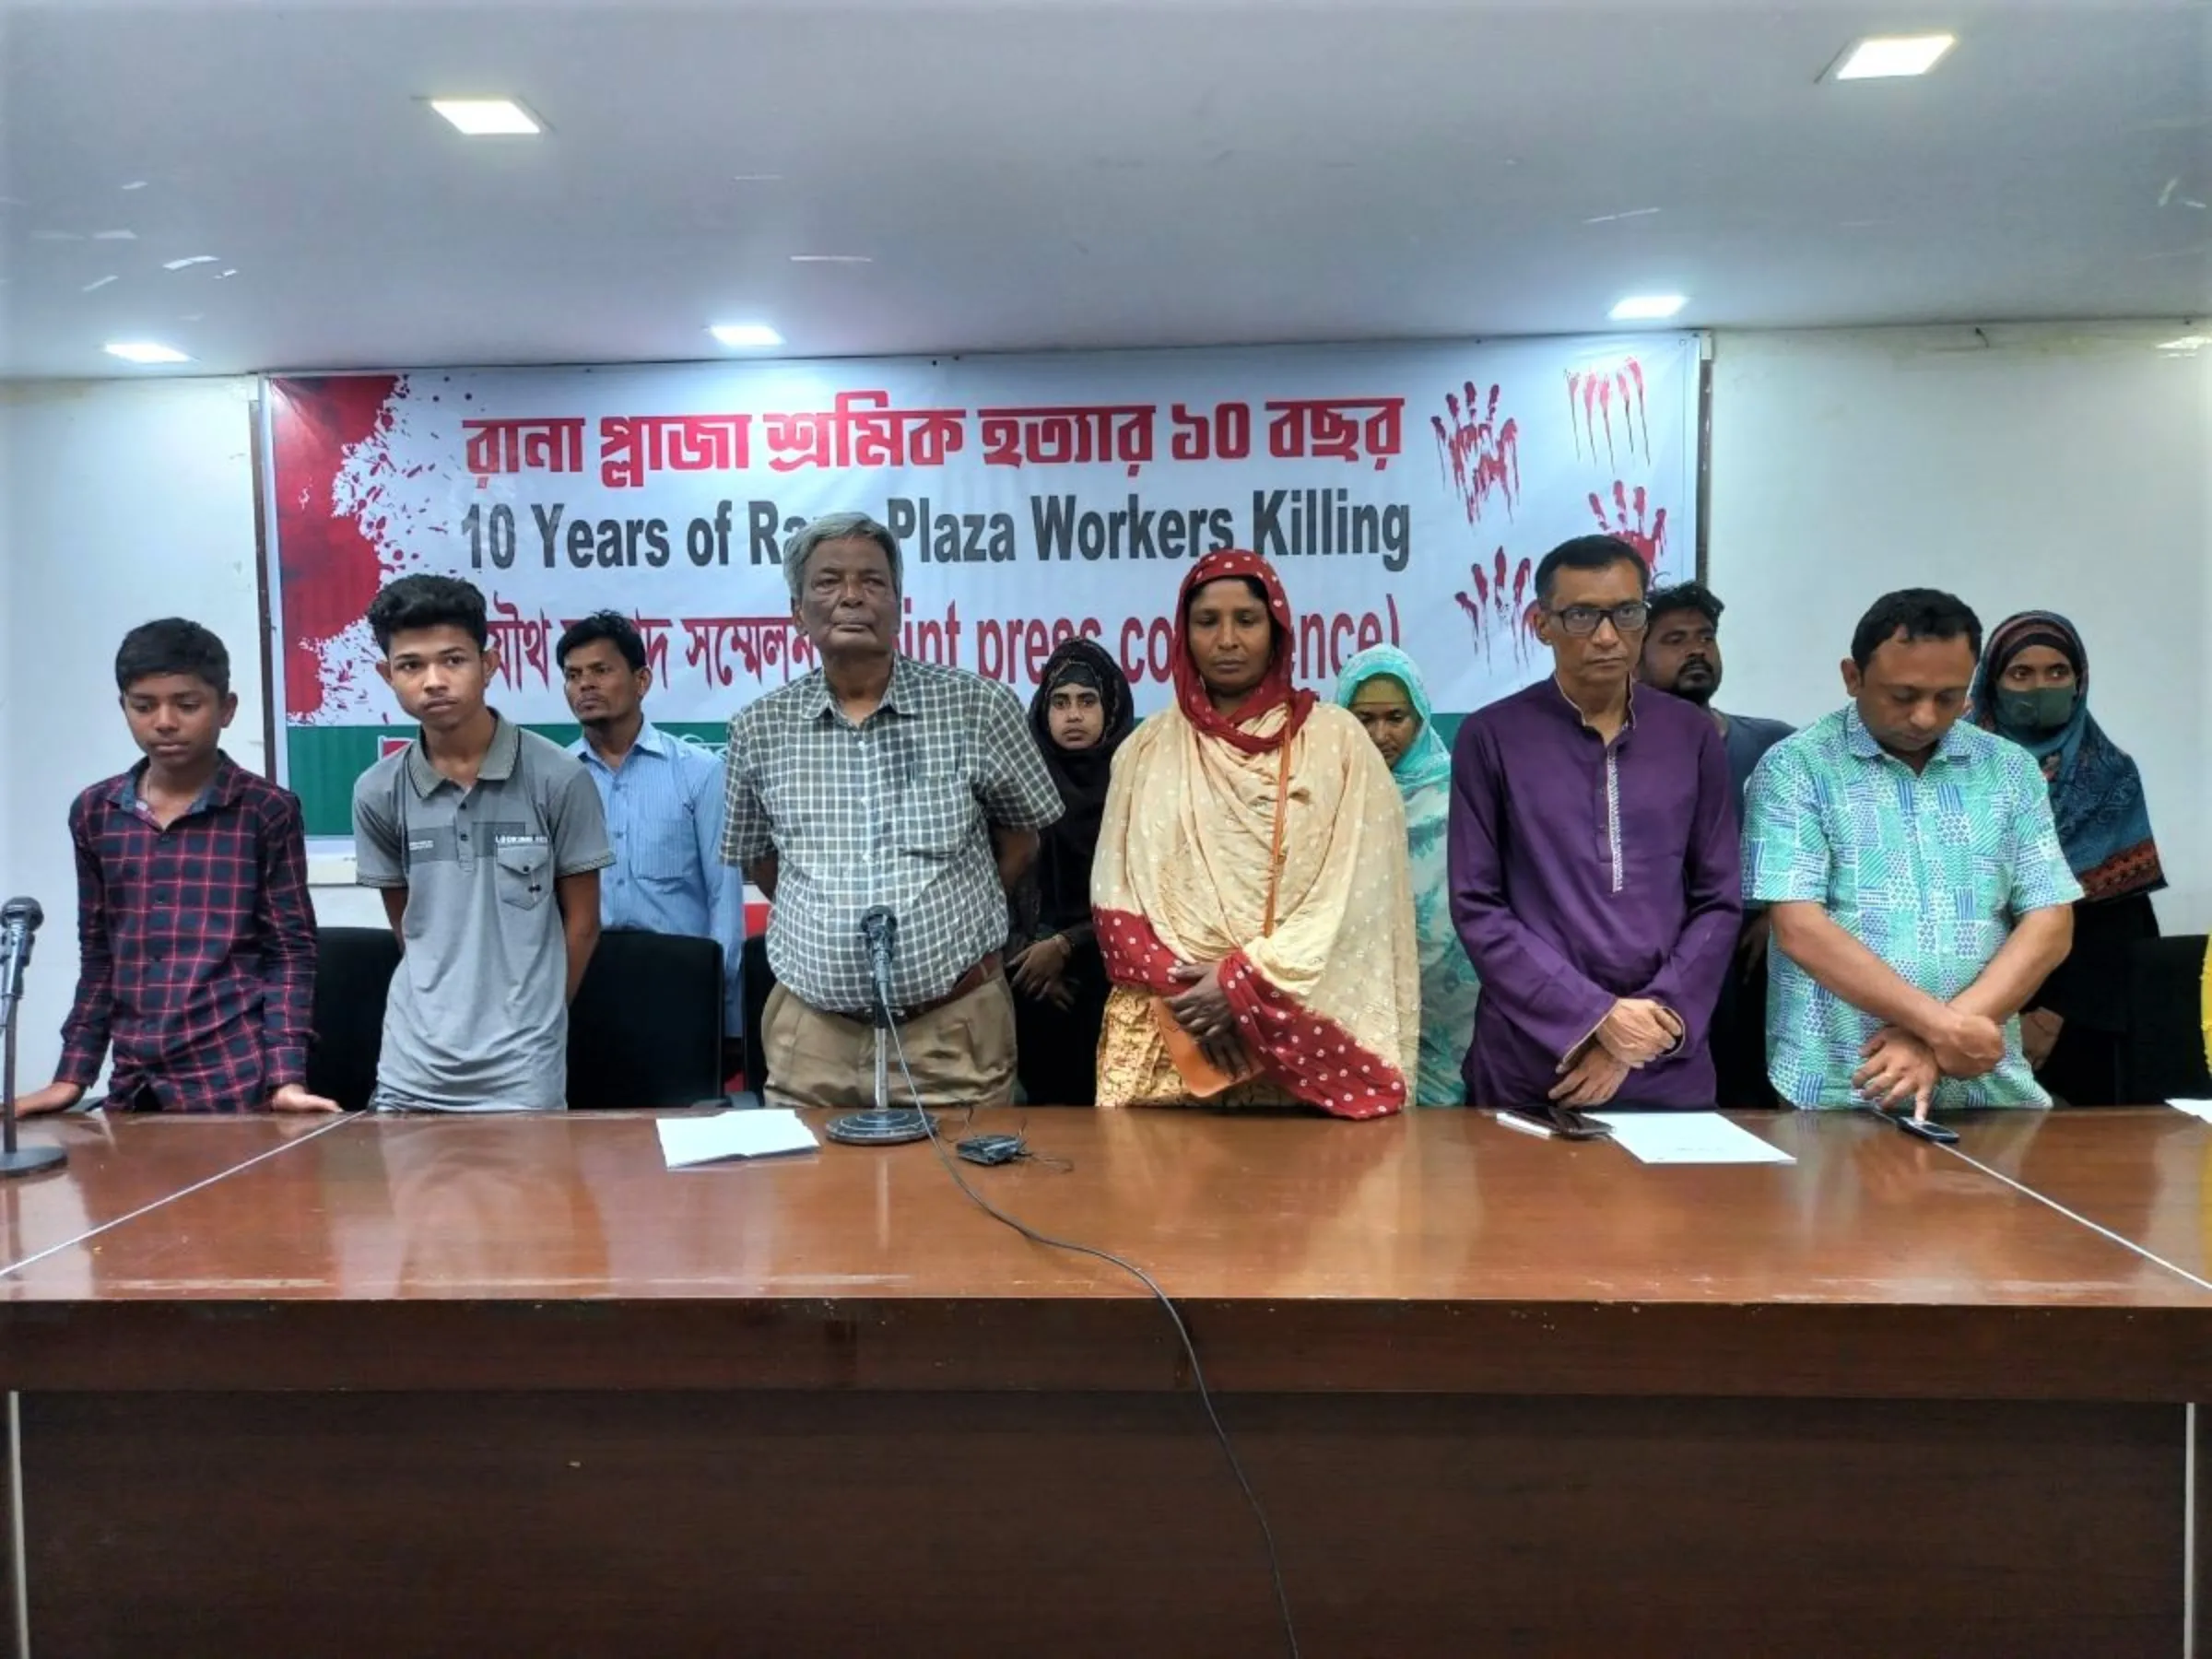 Survivors and family members of the Rana Plaza incident gather at a meeting organised by National Garment Workers Federation in Dhaka, Bangladesh